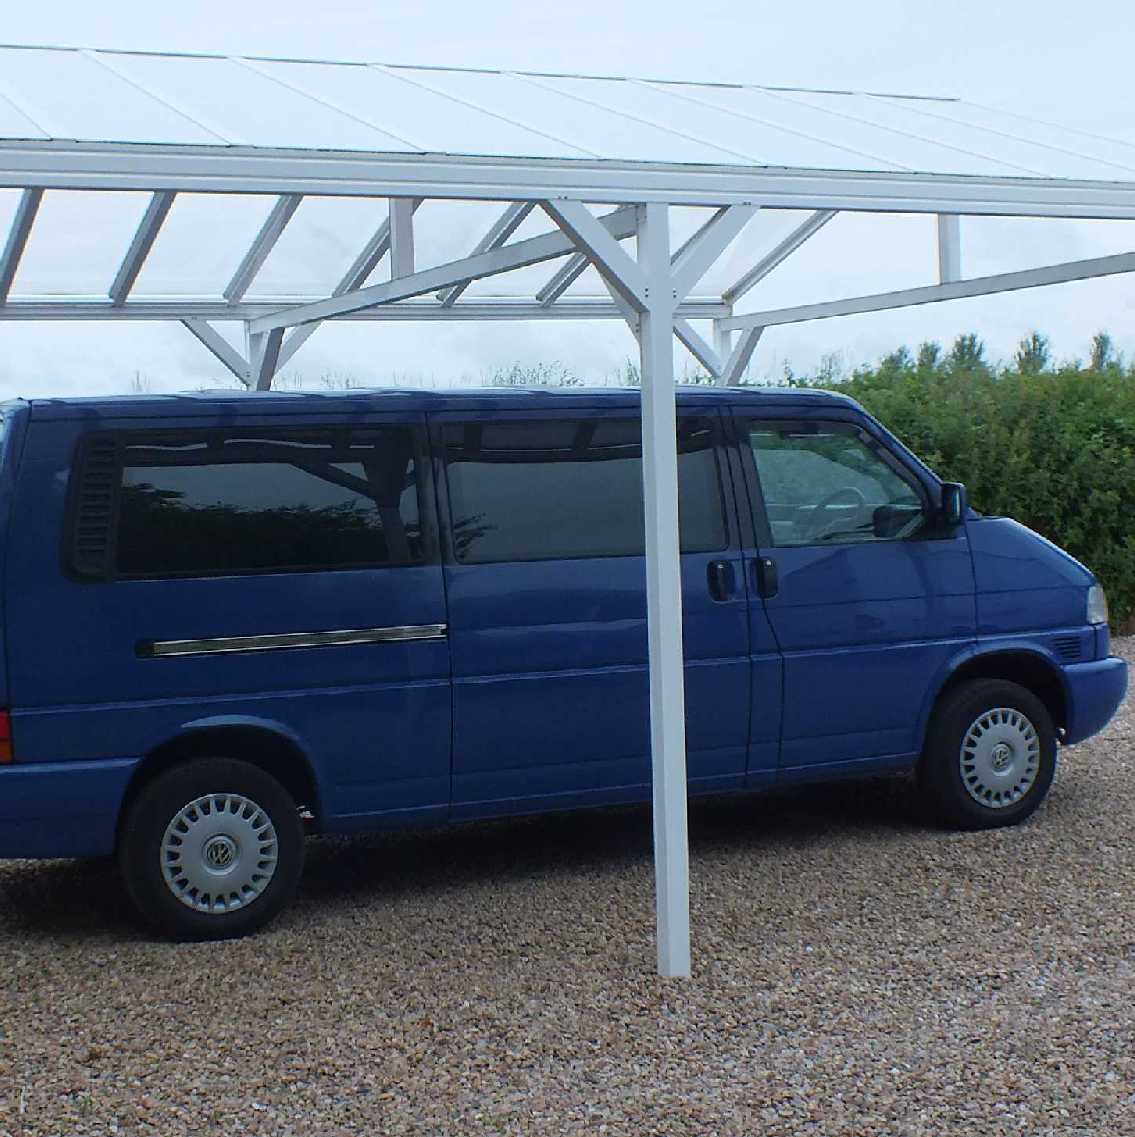 Great deals on Omega Smart Free-Standing, White Gable-Roof (type 1) Canopy with 16mm Polycarbonate Glazing - 4.2m (W) x 3.5m (P), (6) Supporting Posts